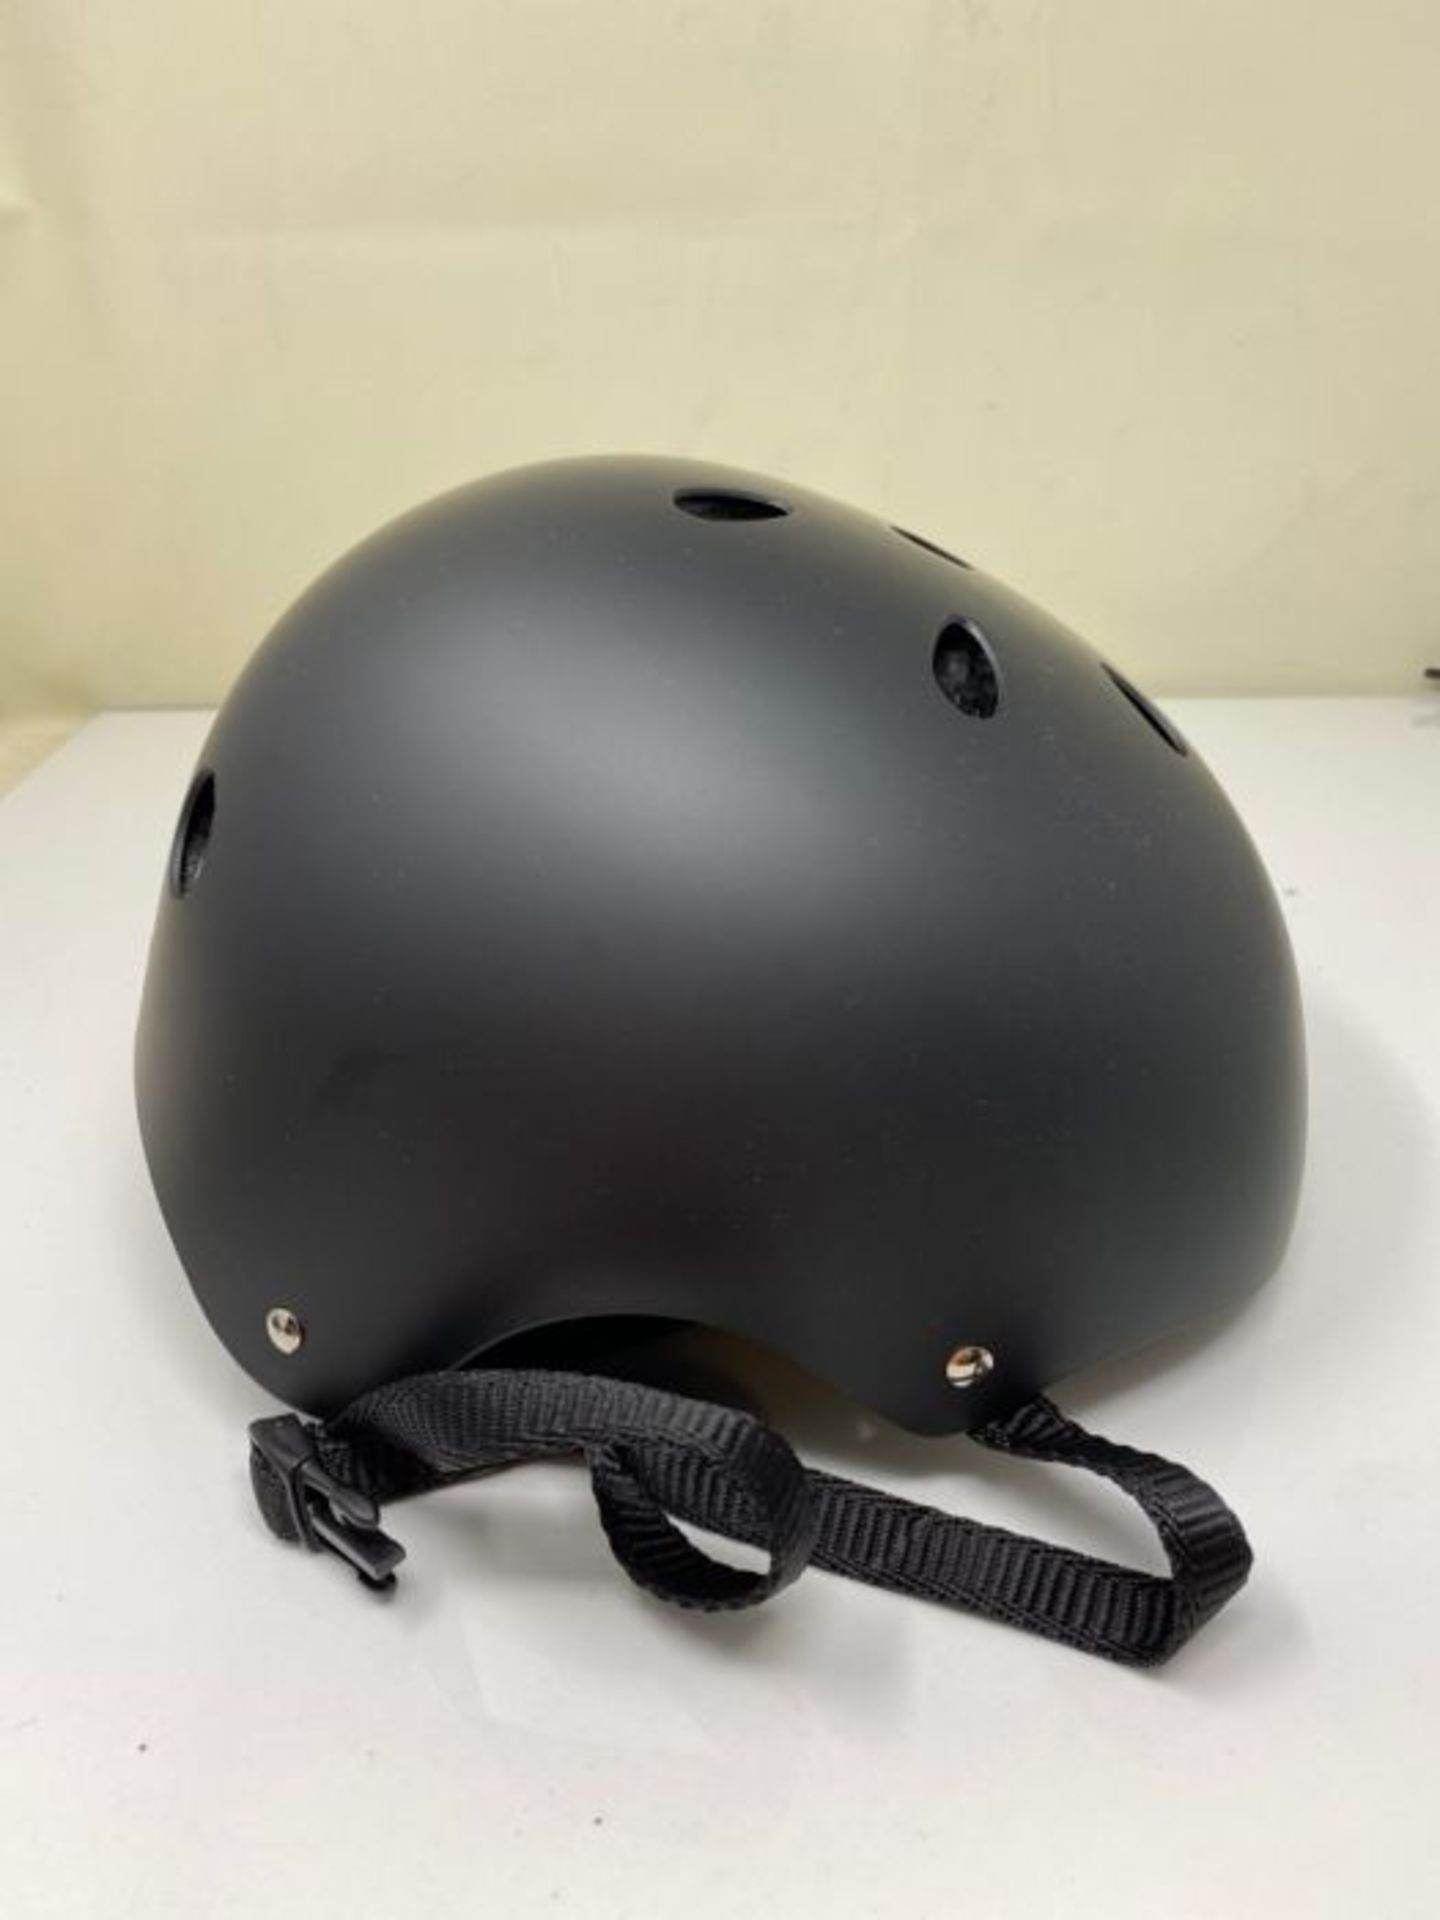 SCOOTY Casque pour Trottinette/Hoverbaord/Skate/Roller Taille Mixte Adulte, Noir, Medi - Image 2 of 2